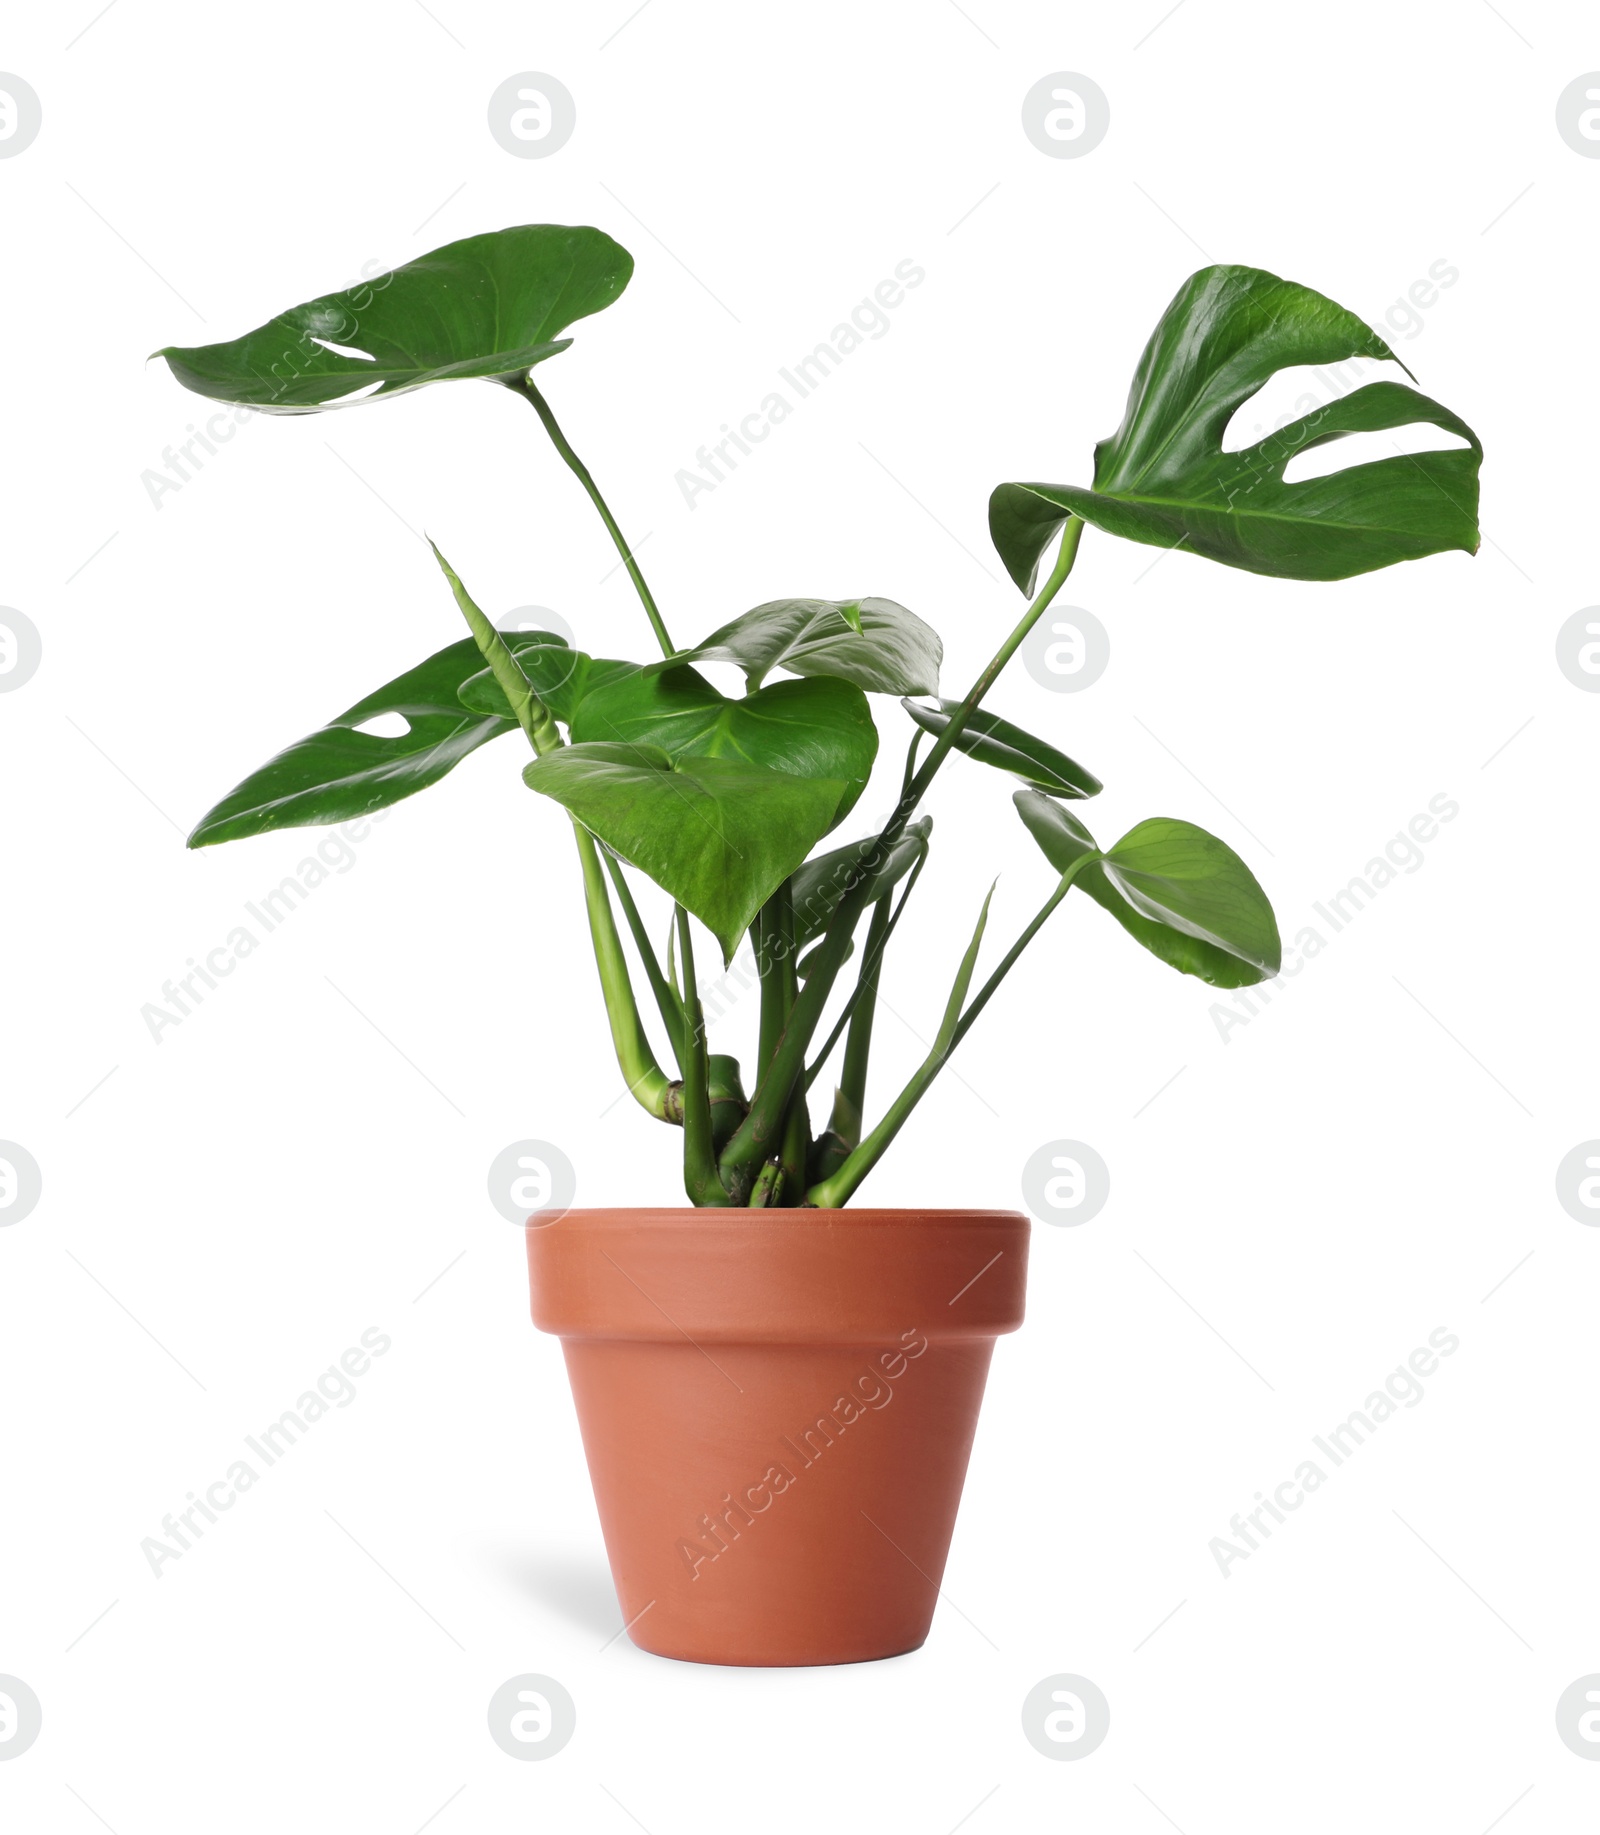 Image of Beautiful monstera plant in terracotta pot isolated on white. House decor